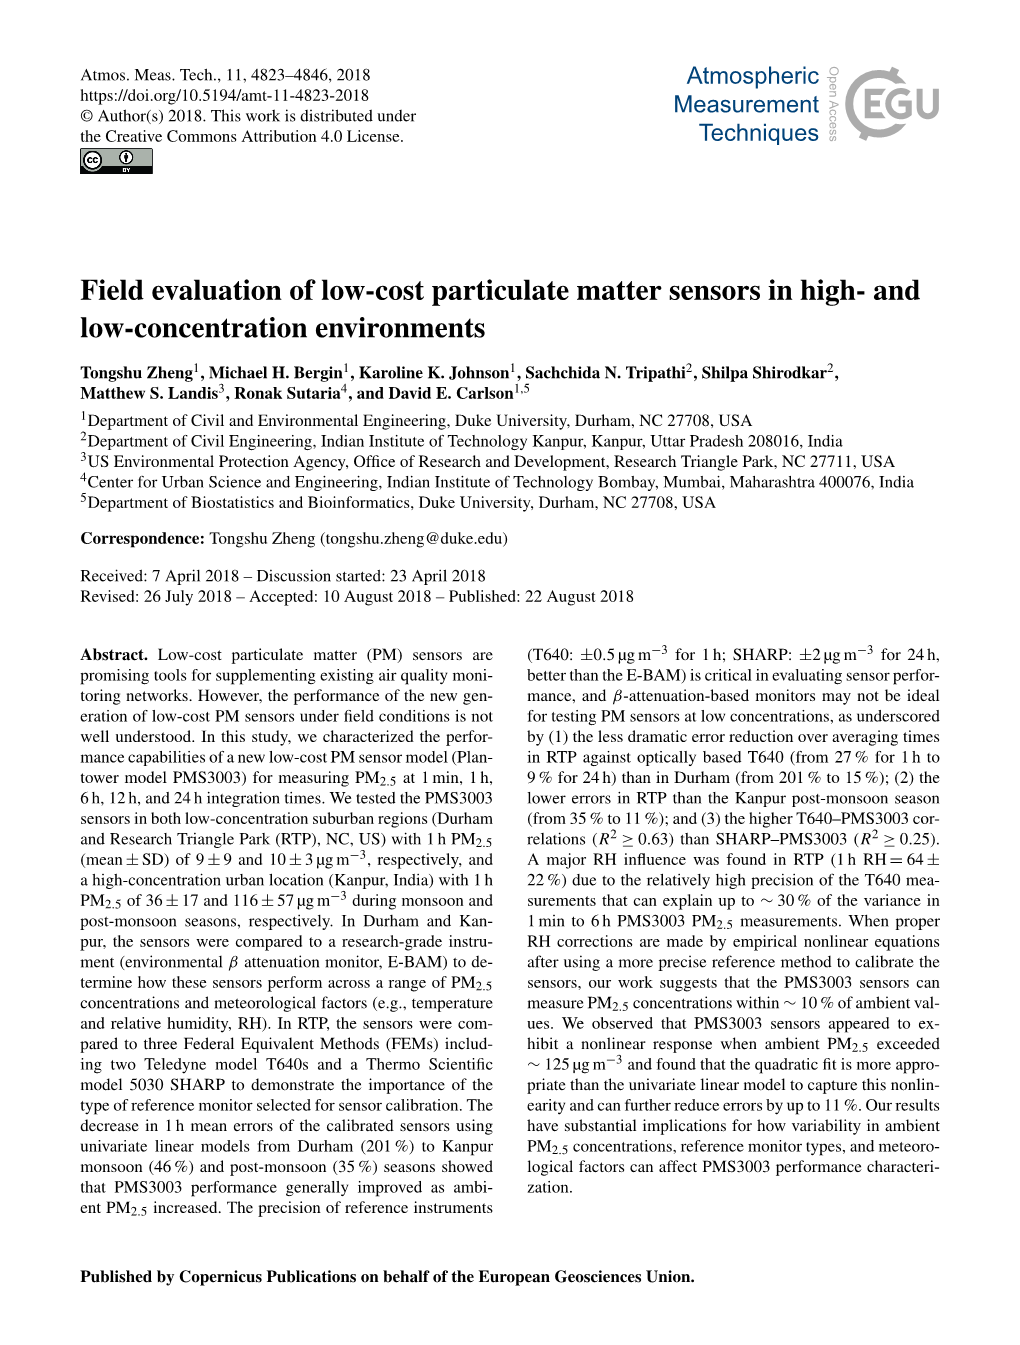 Field Evaluation of Low-Cost Particulate Matter Sensors in High- and Low-Concentration Environments